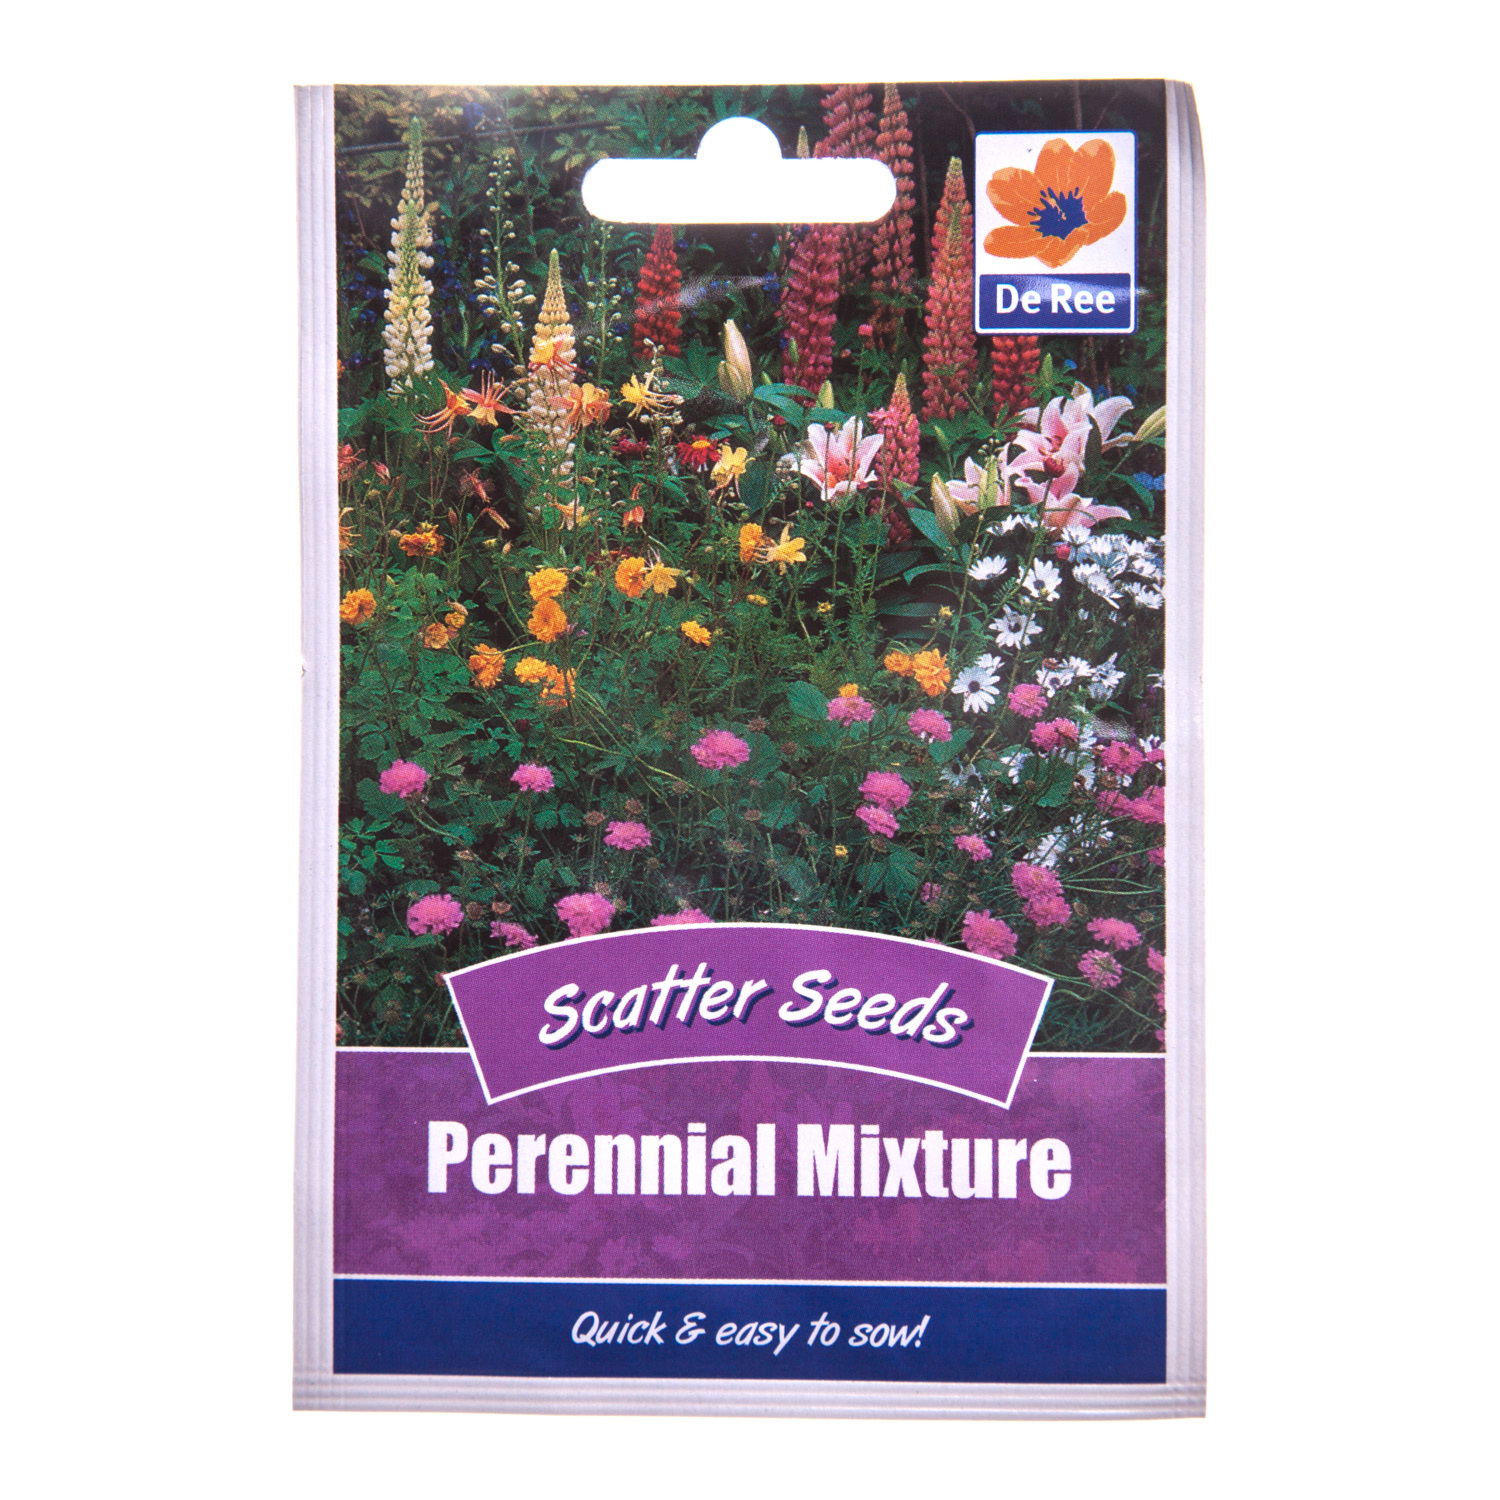 Perennial Mixture Scatter Seeds Image